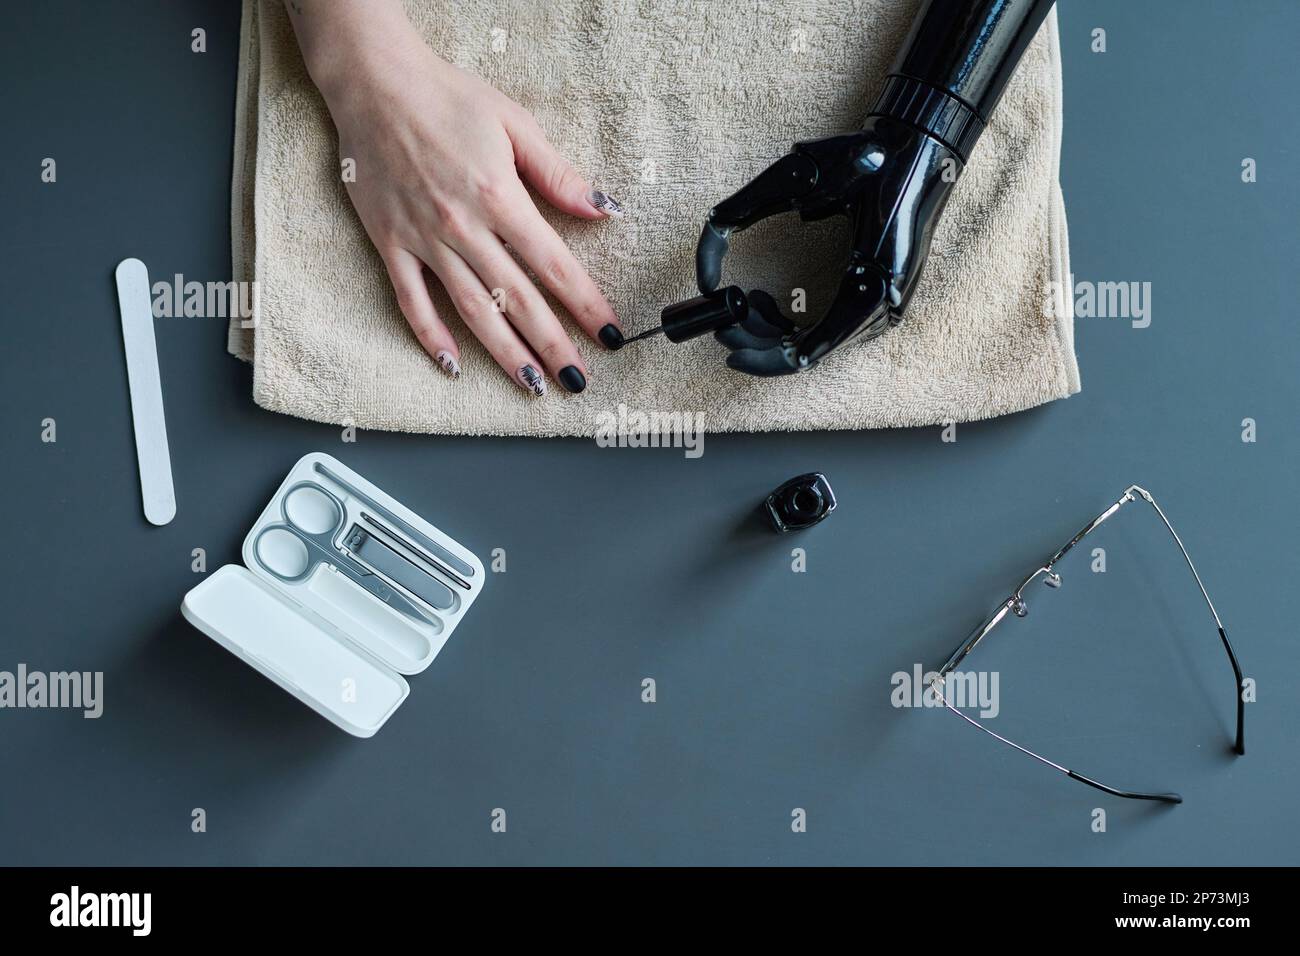 High angle view of young woman with prosthetic arm painting her nails with varnish Stock Photo